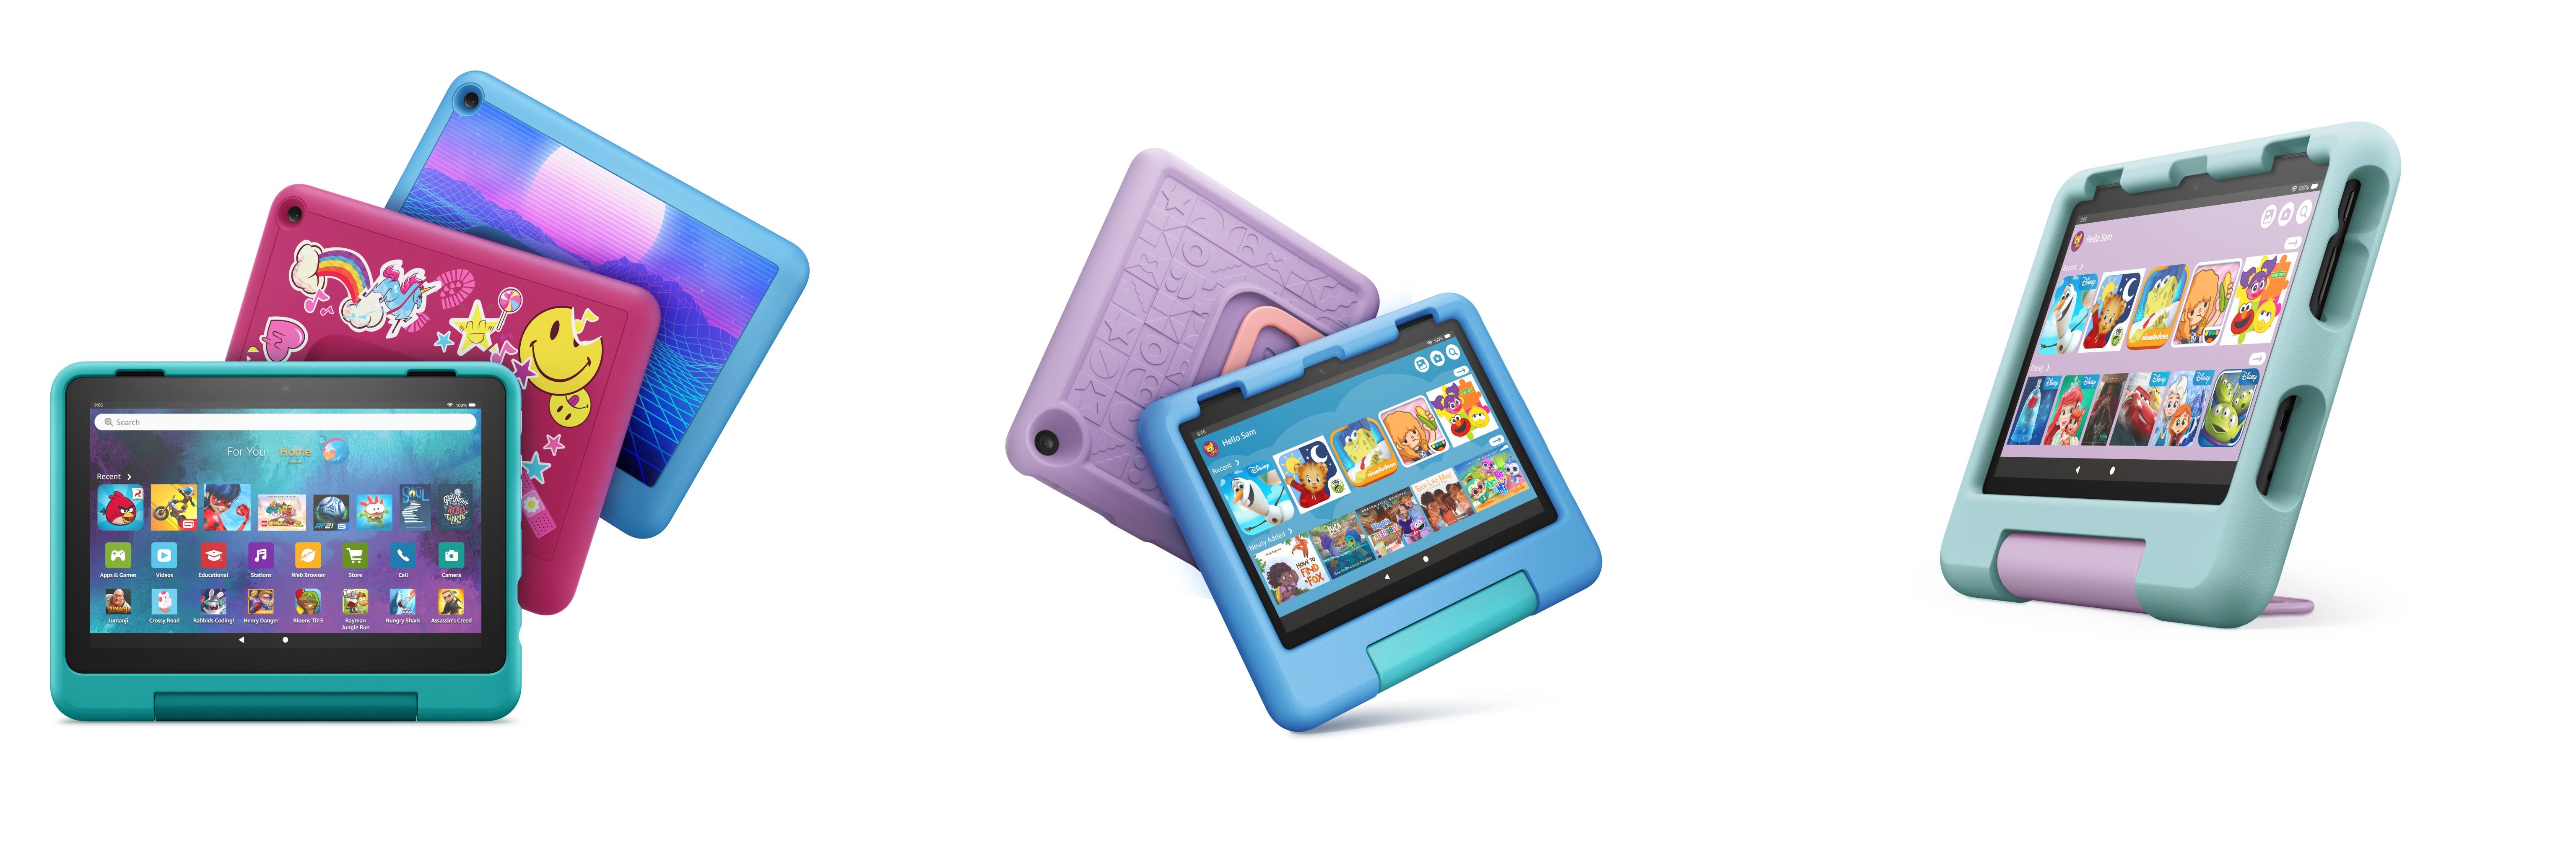 Amazon Fire HD 8 tablets for kids.